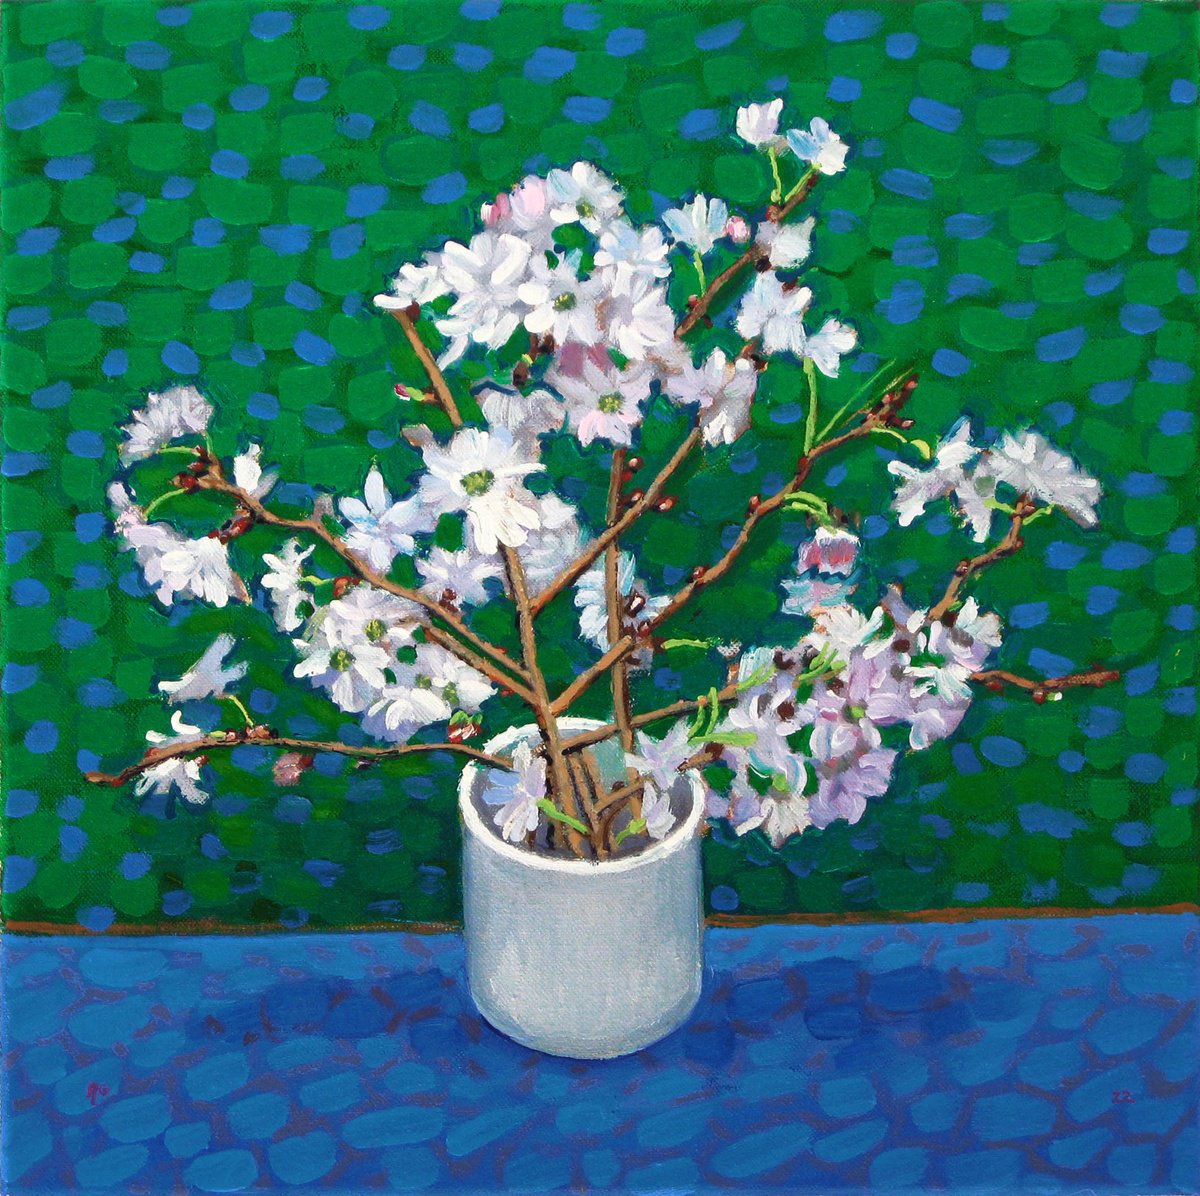 Flowering Cherry in a Cup (1) by Richard Gibson